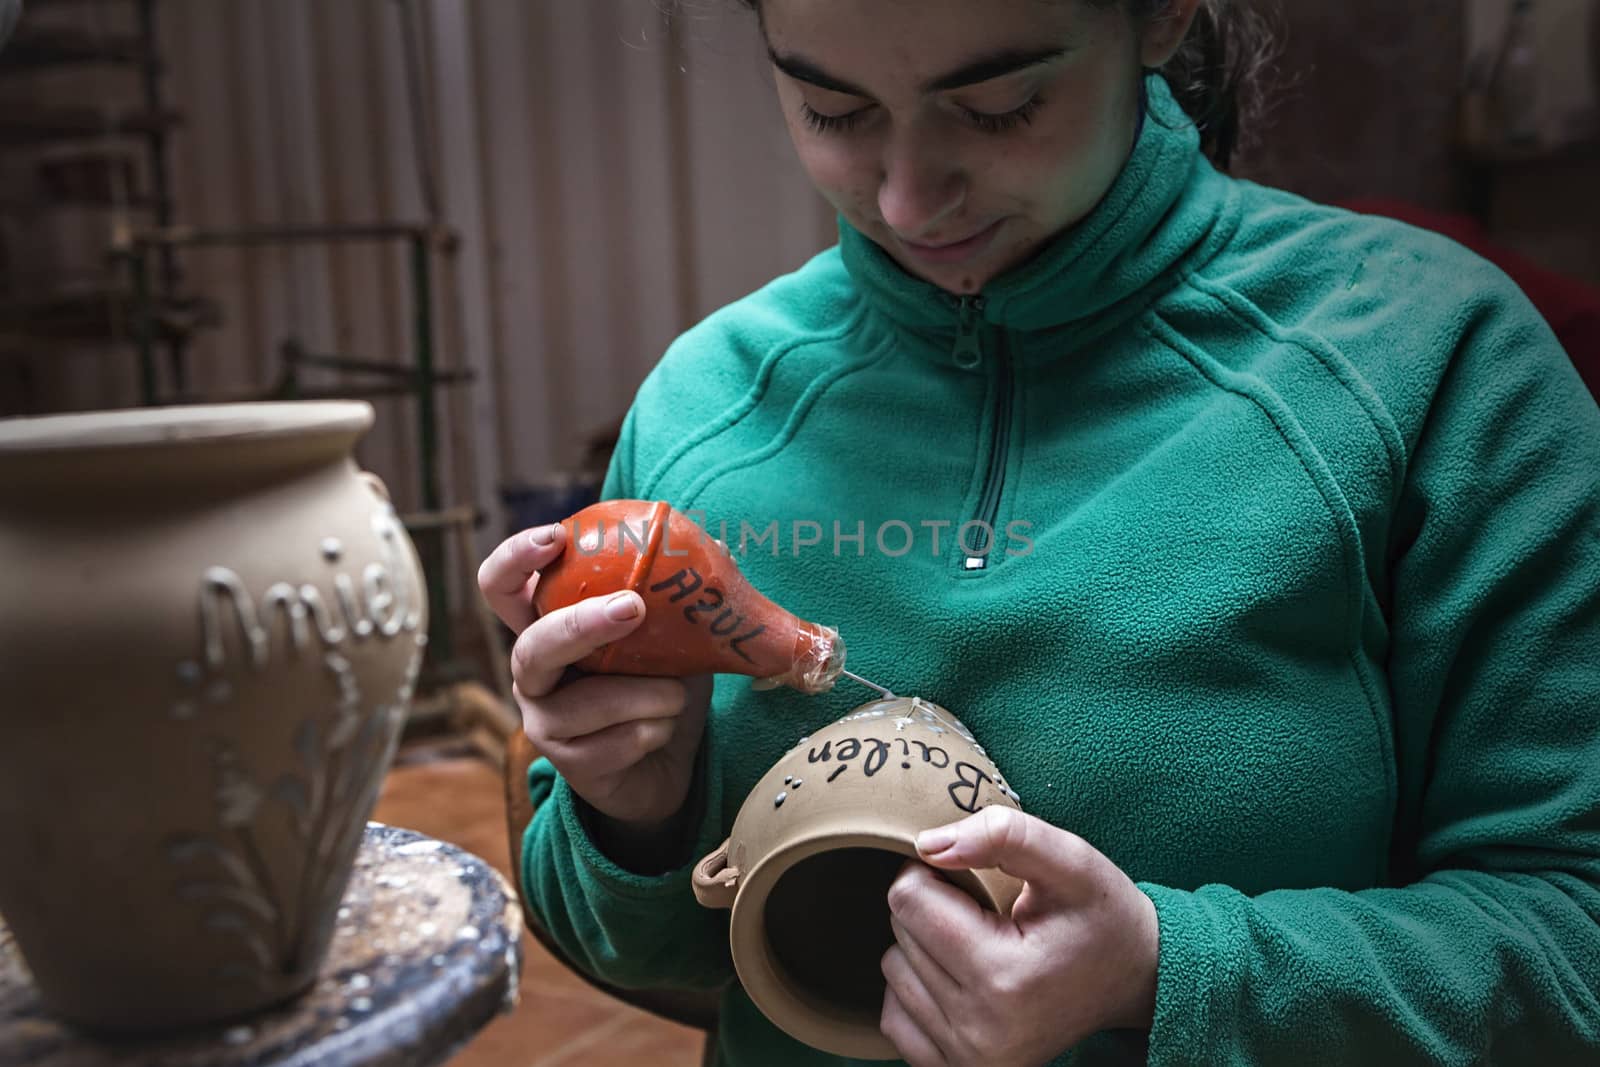 Potter decorating with enamel a ceramics piece before putting in the stove with branches drawings, clay pottery ceramics typical of Bailen, Jaen province, Andalucia, Spain